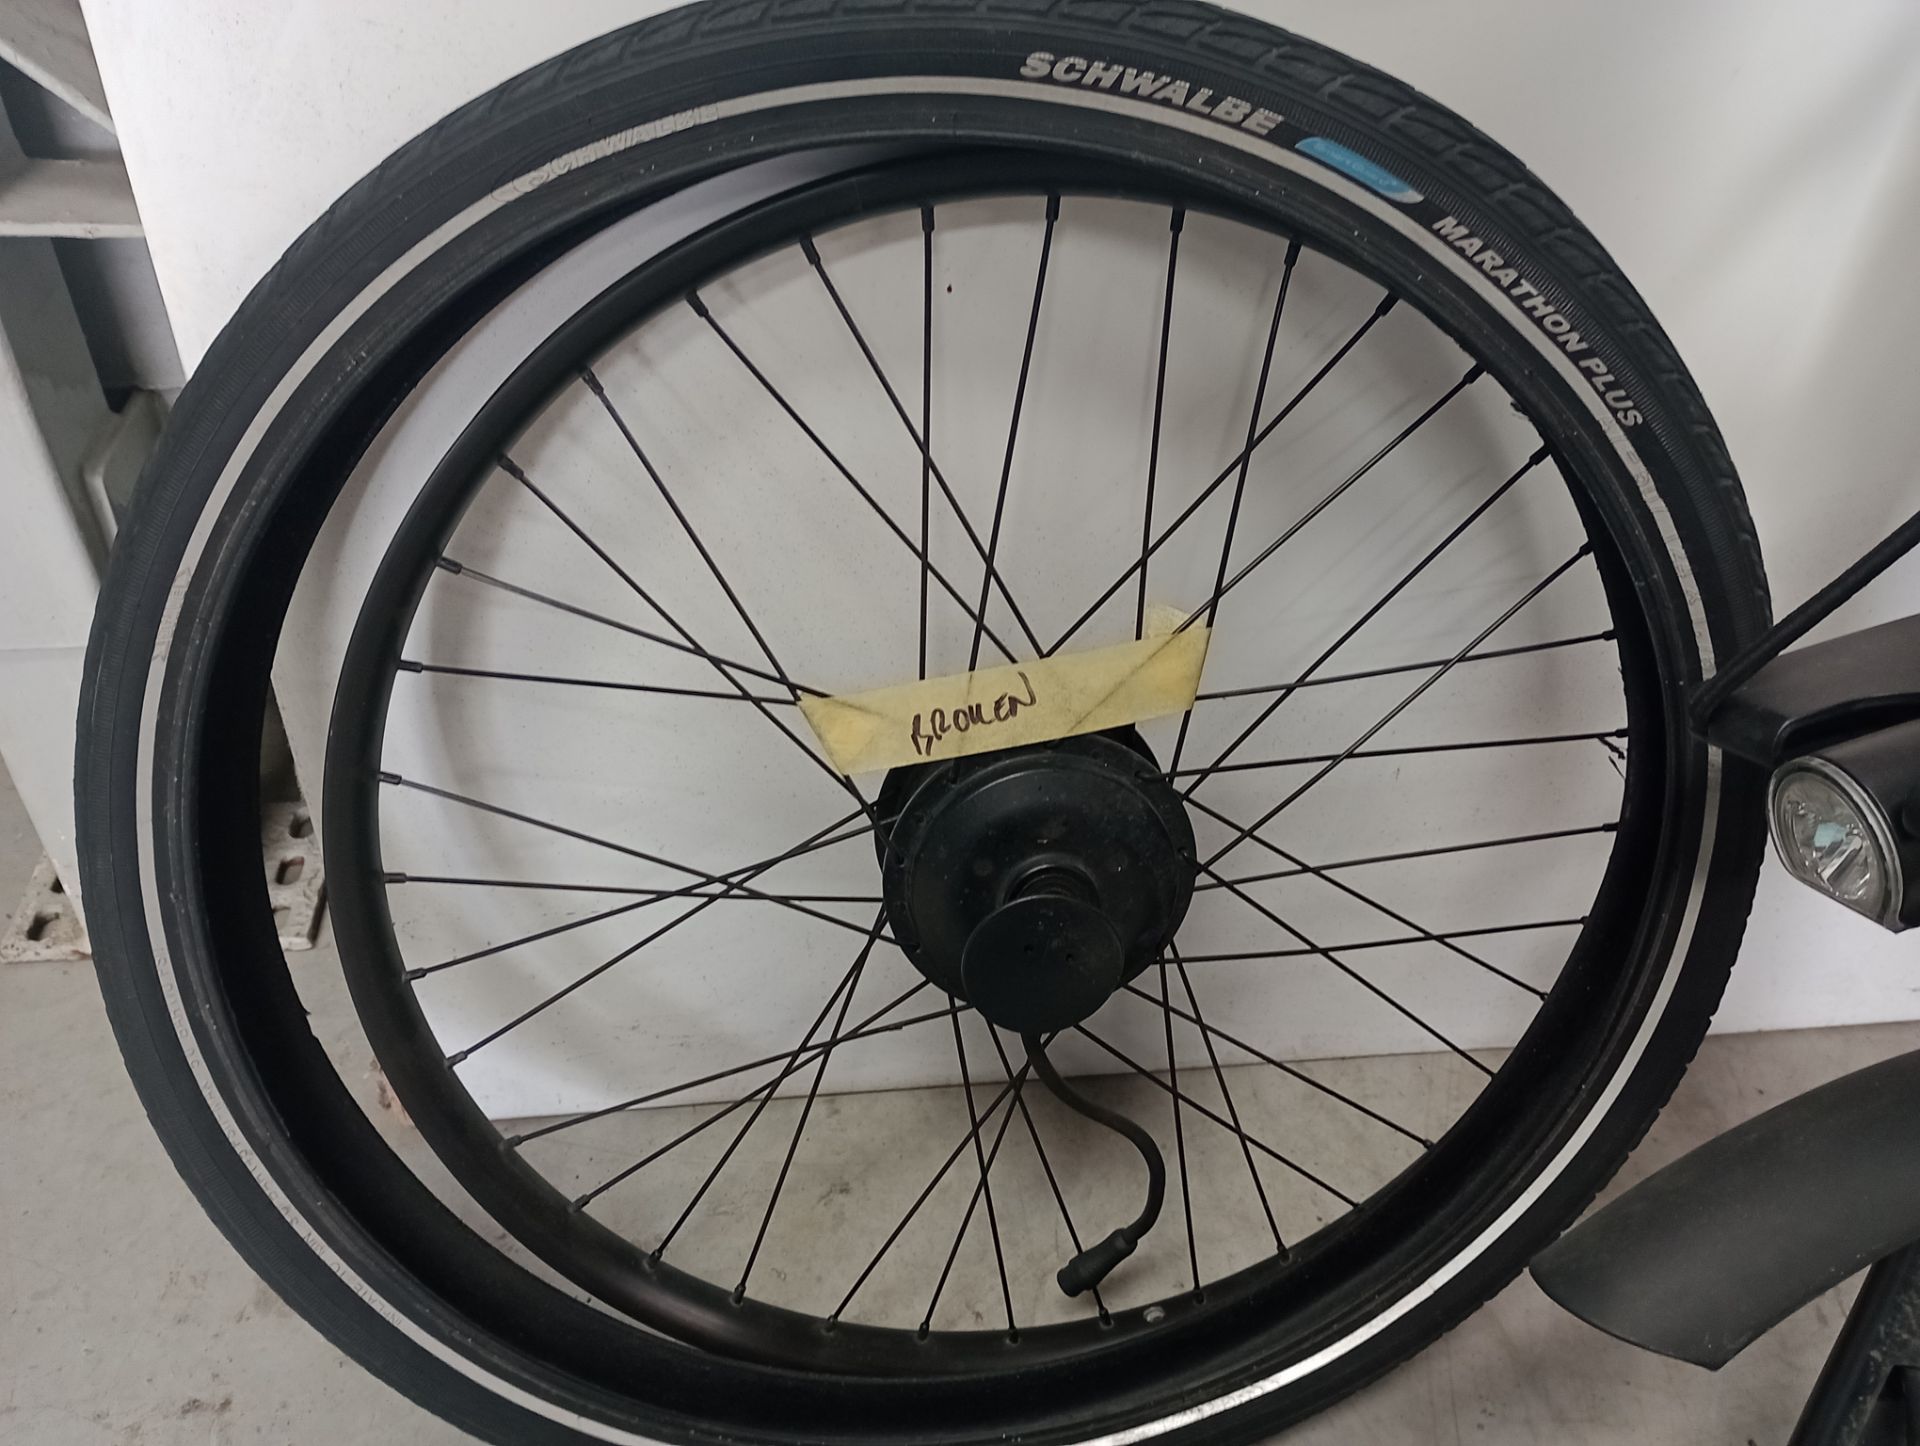 VanMoof X3 Electric Bike, Serial Number ASY4101879 (NOT ROADWORTHY - FOR SPARES ONLY) (No codes - Image 2 of 3